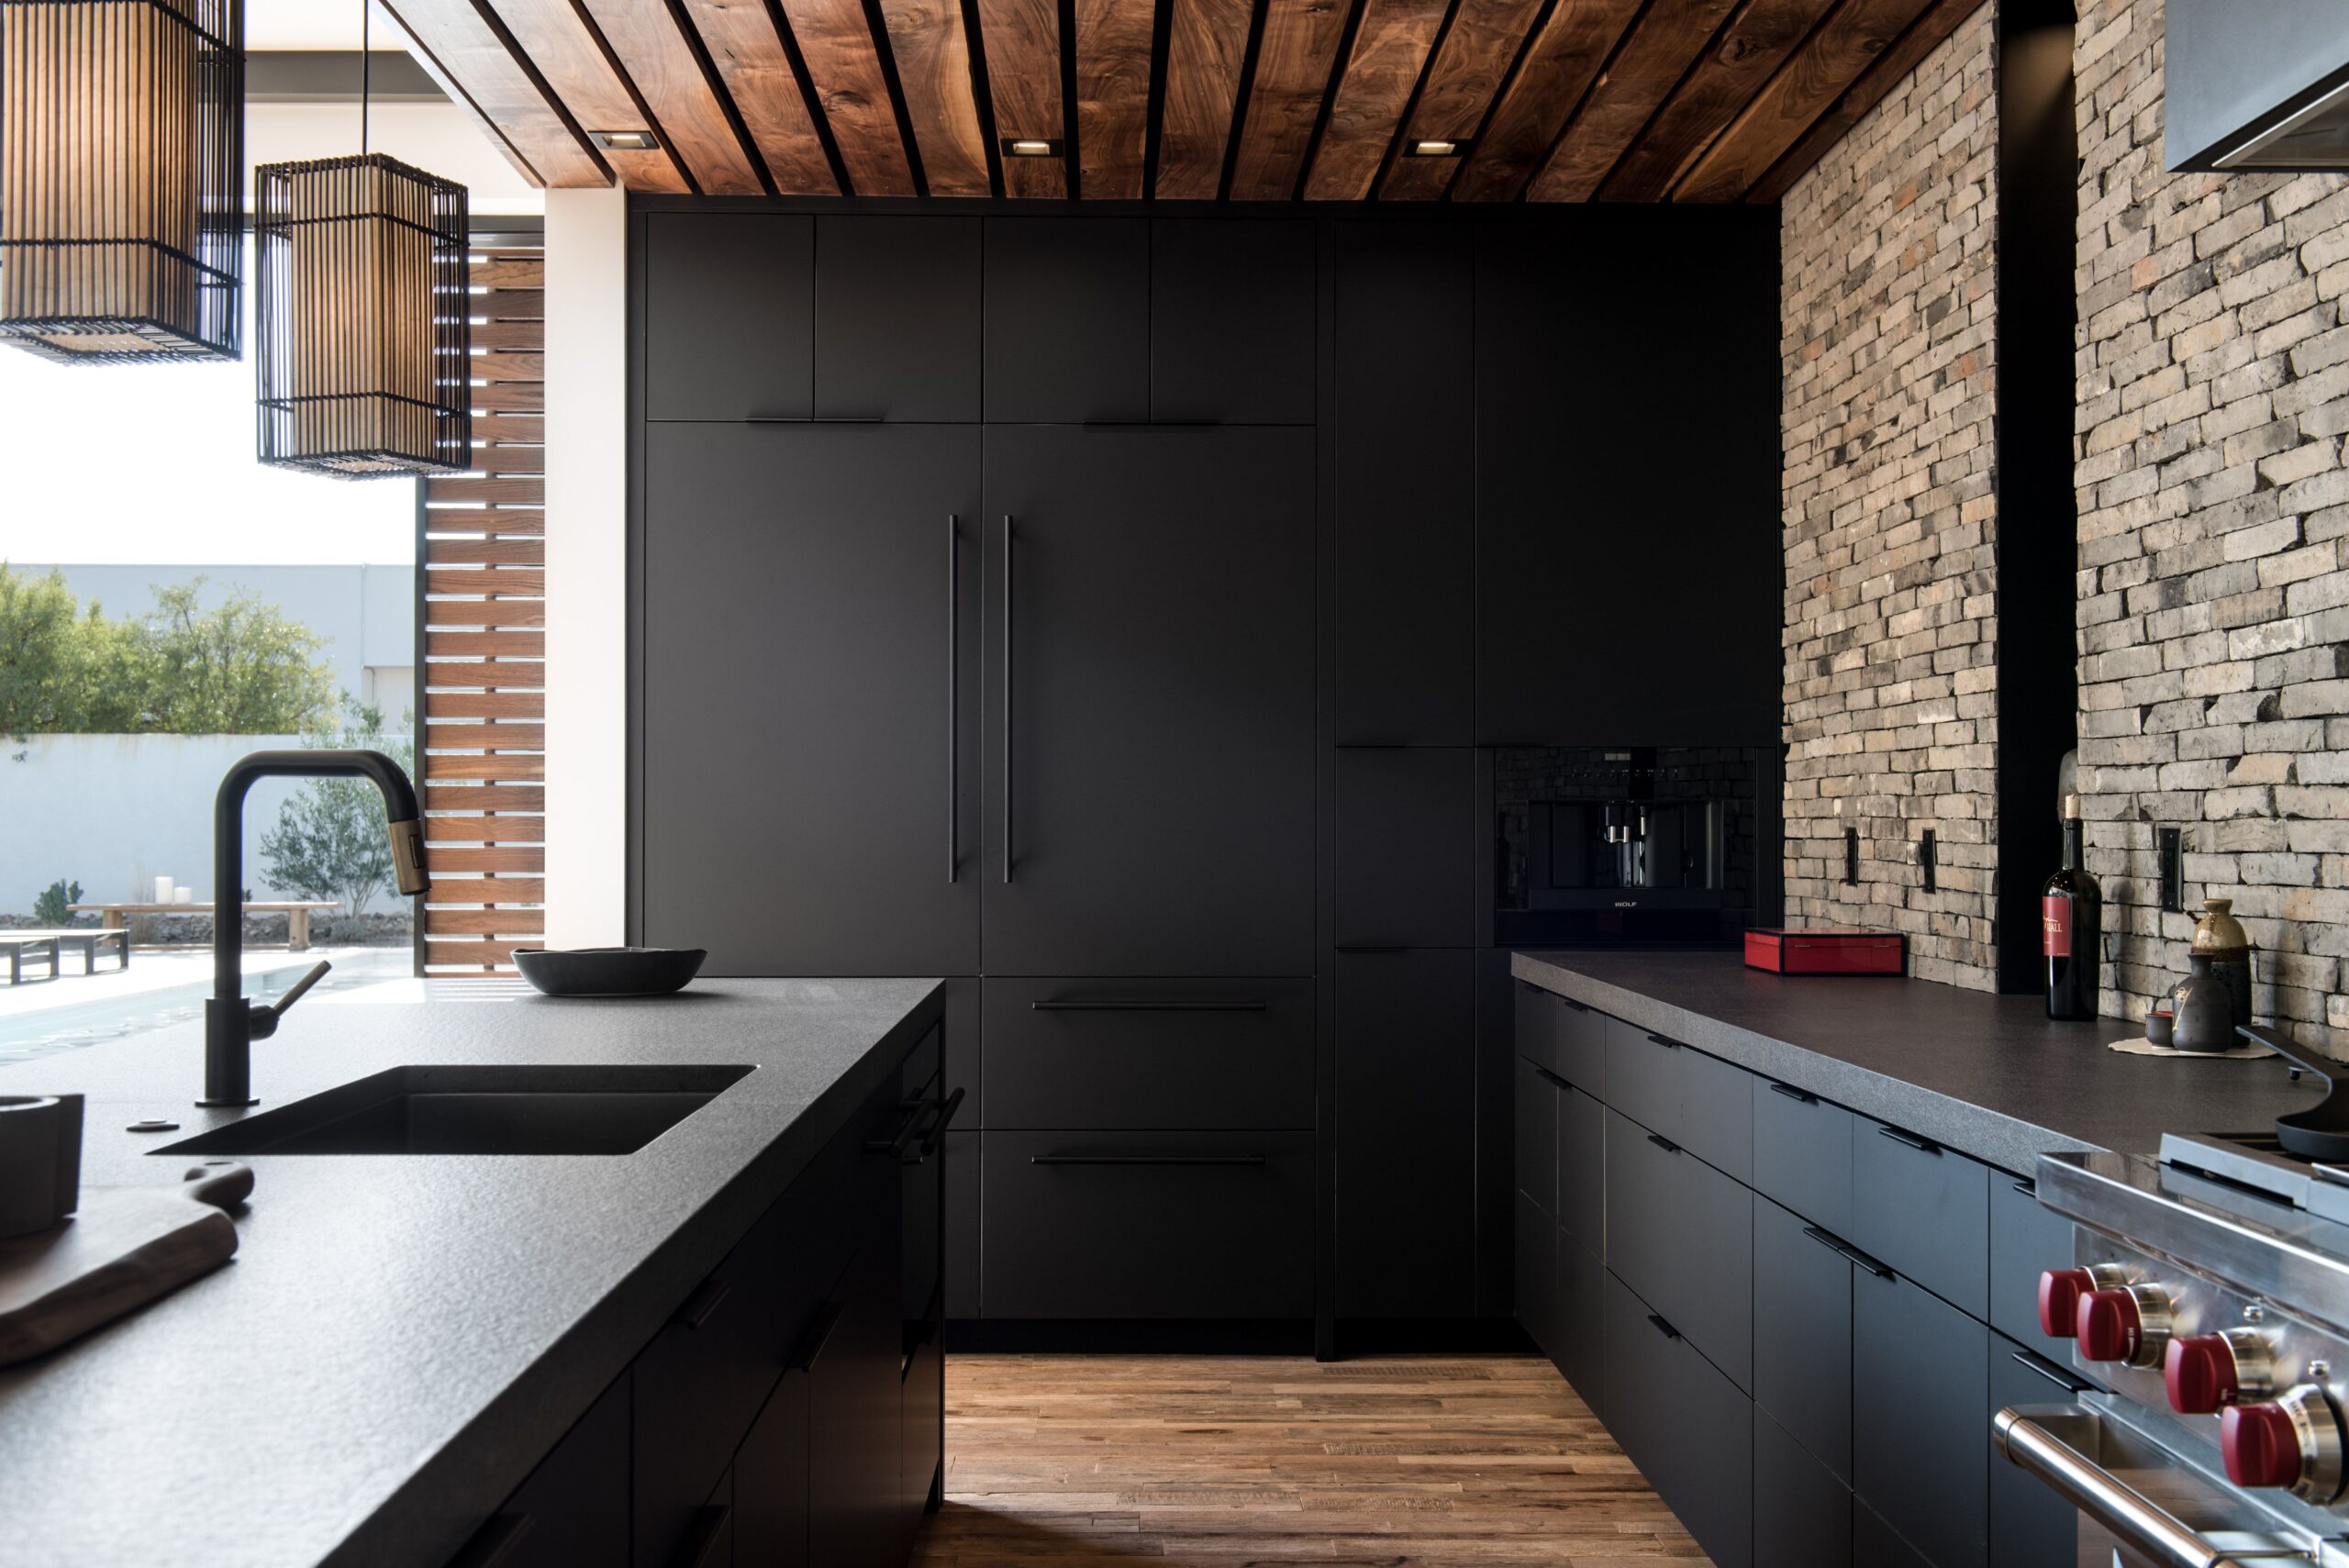 Matte black cabinets make a genuinely striking impression. Matte coatings have a velvety feel that adds depth and character to your kitchen. Combine sleek, modern hardware with light-colored countertops and backsplashes to create a dramatic contrast that showcases the beauty of the black. 